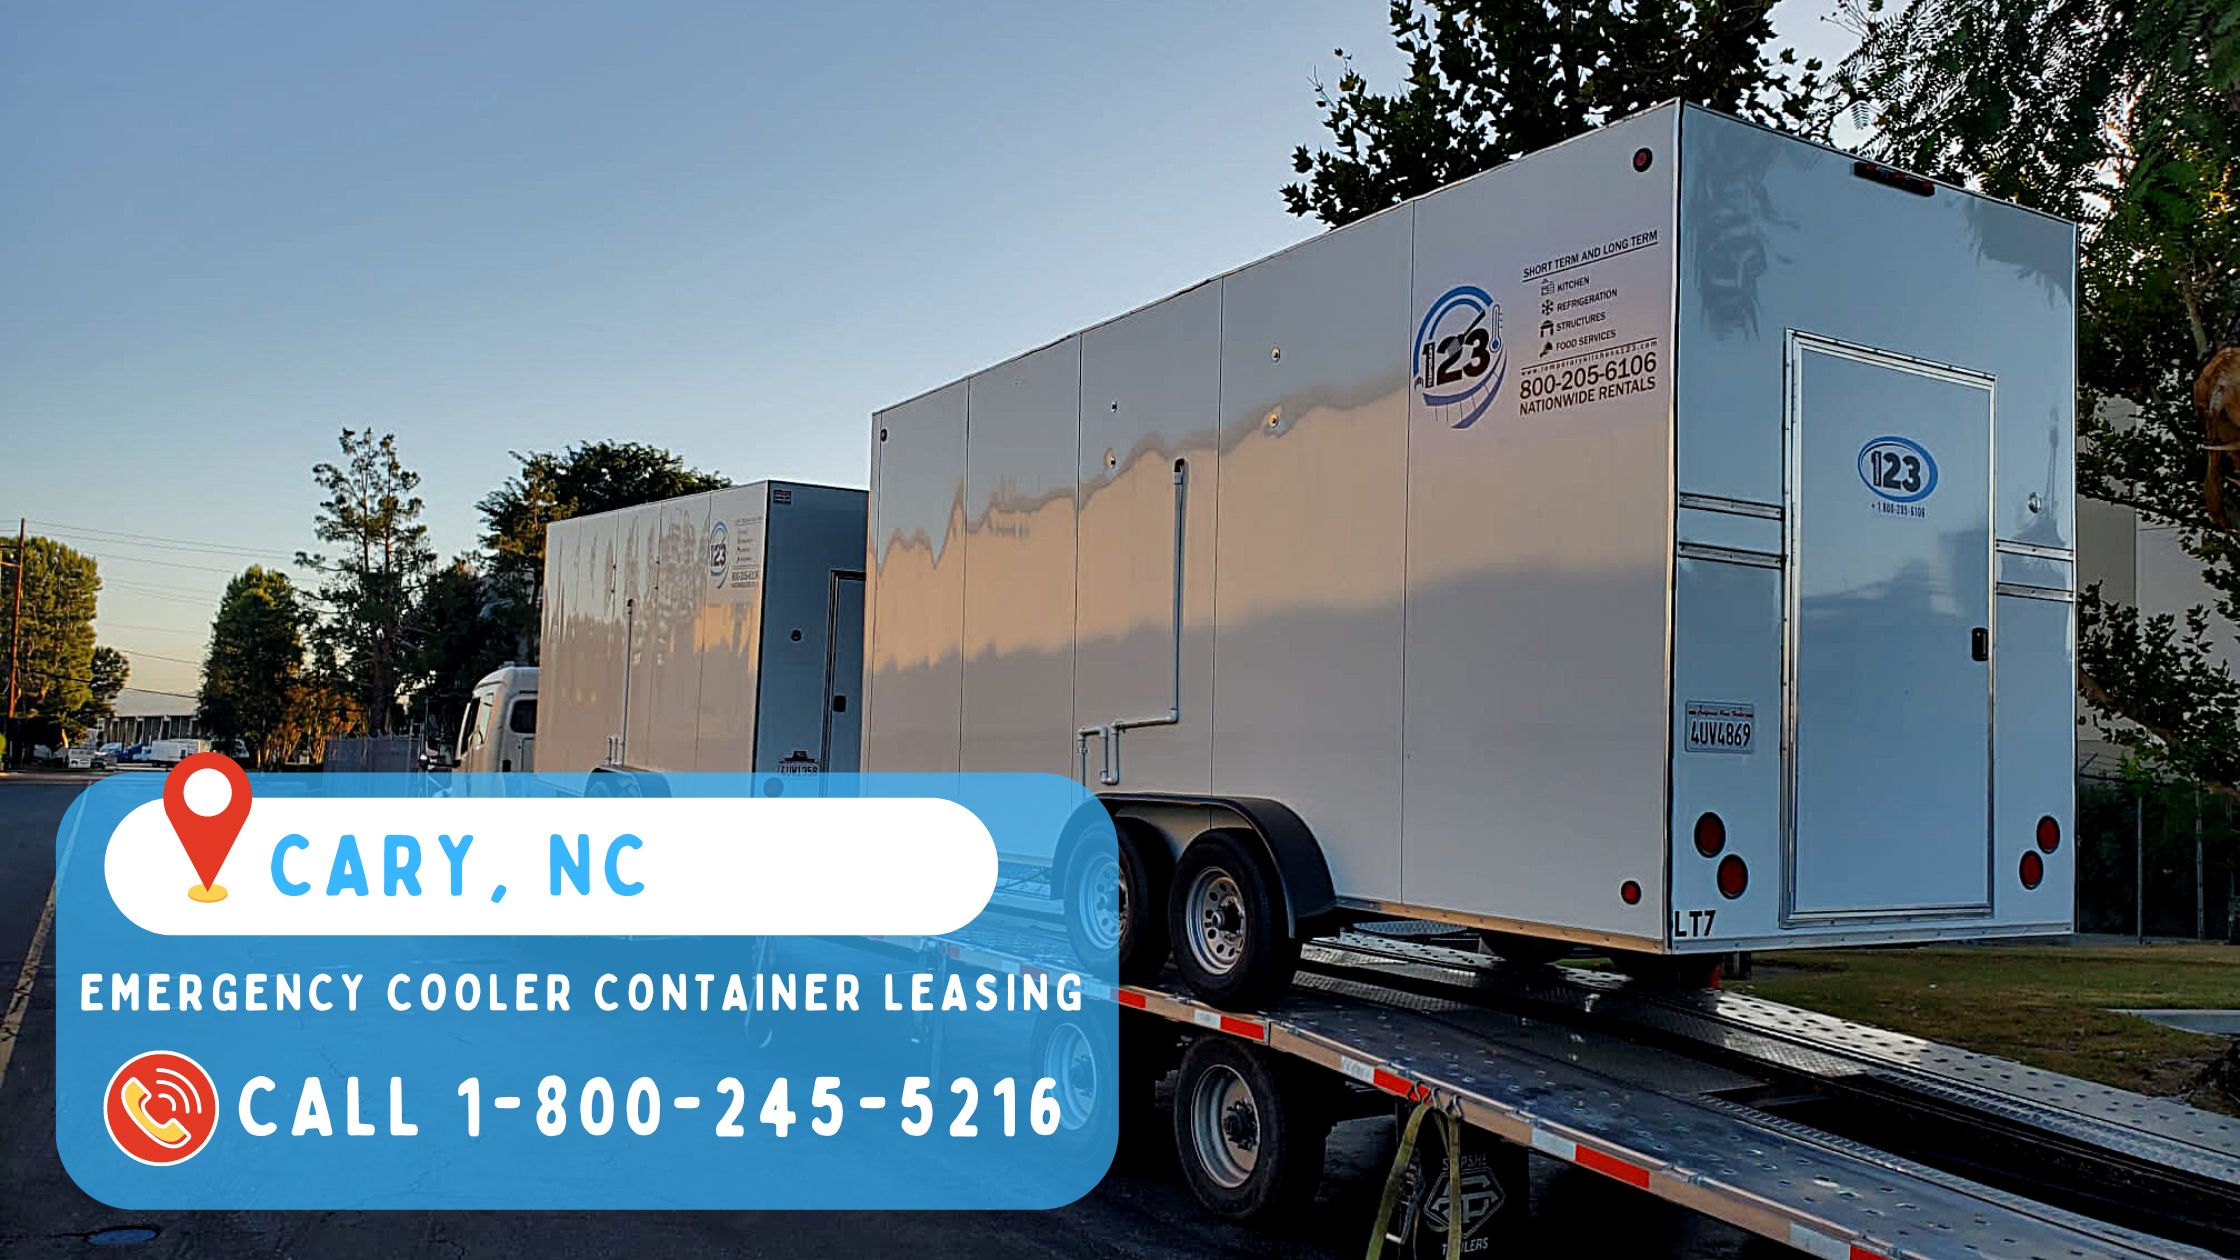 Emergency Cooler Container Leasing in Cary